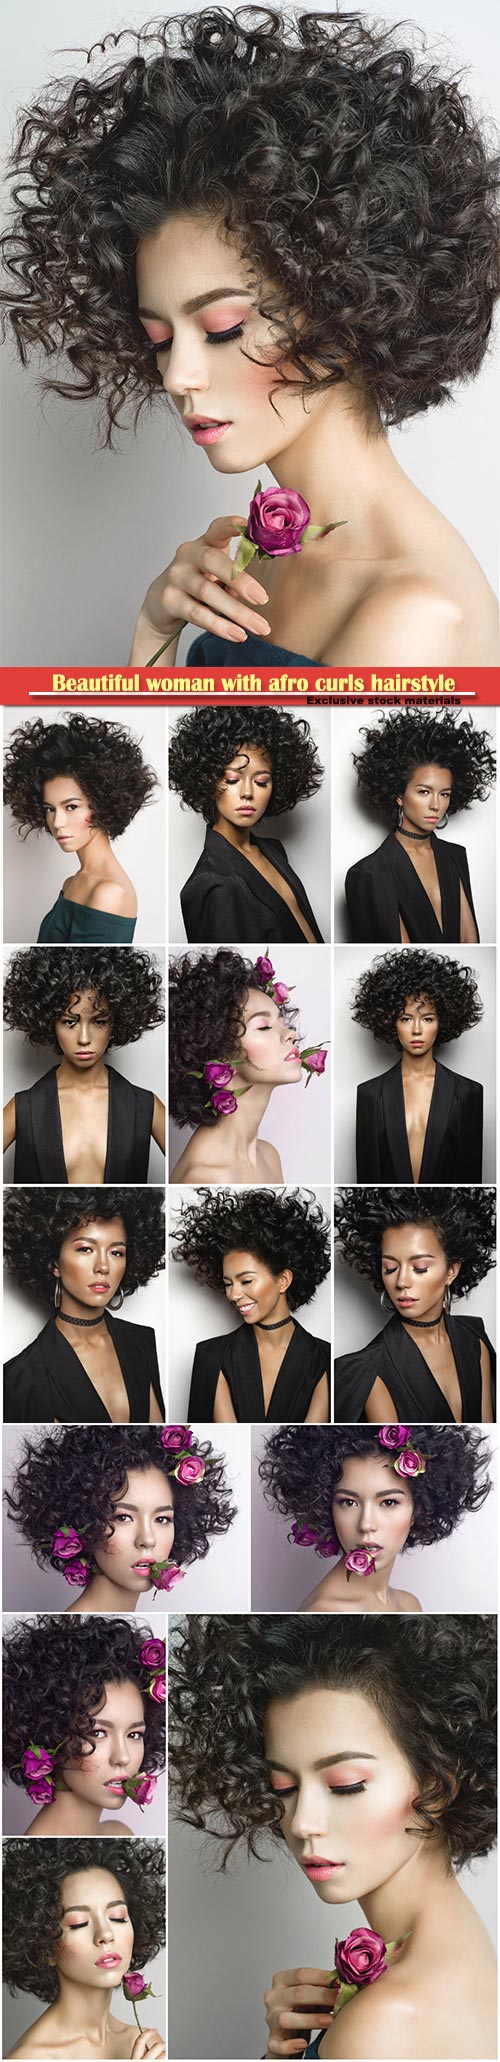 Beautiful woman with afro curls hairstyle with rose